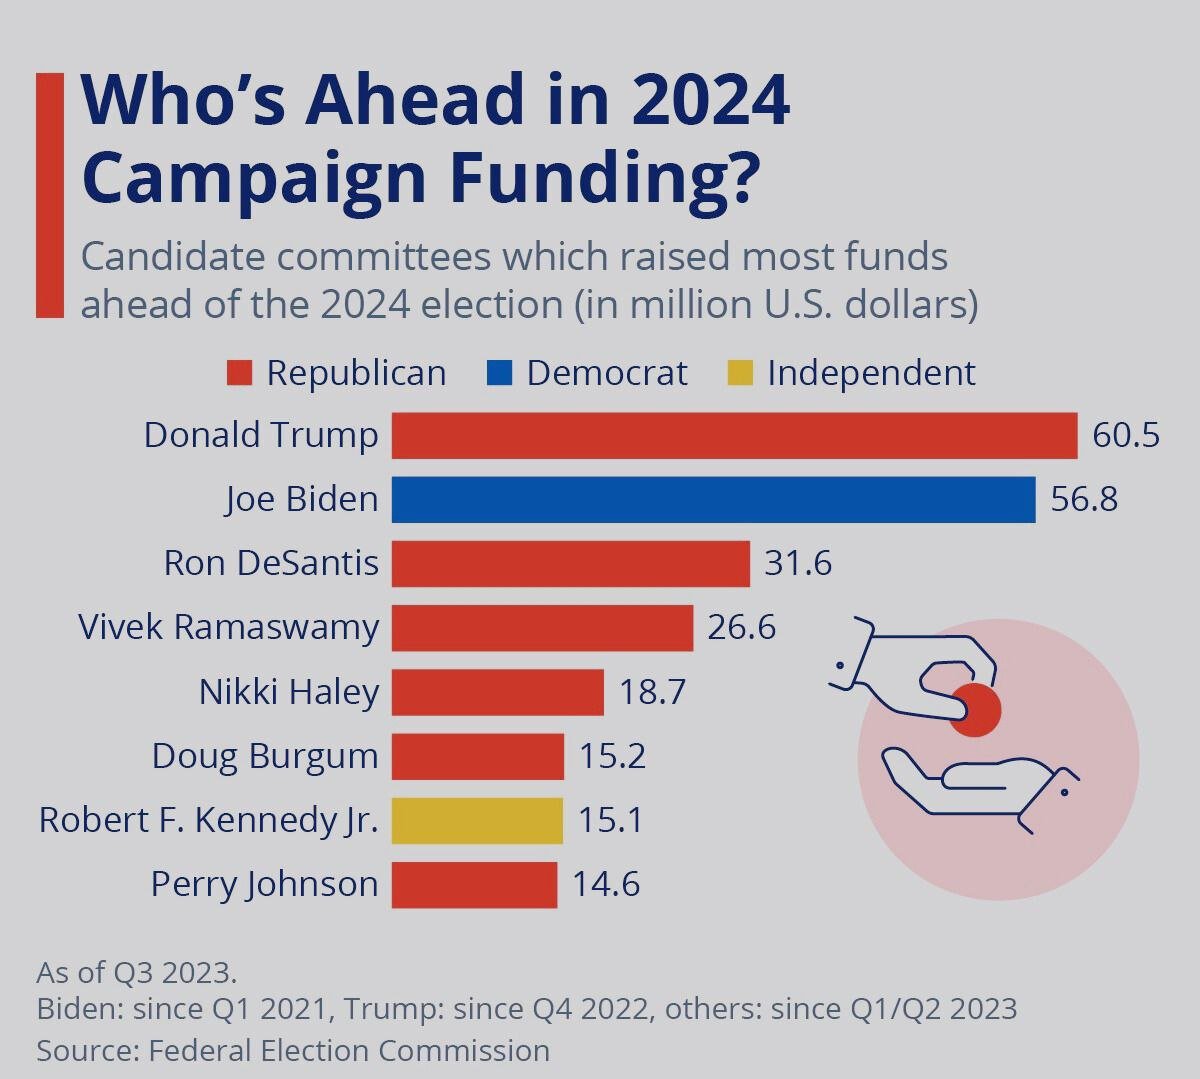 Campaign funding